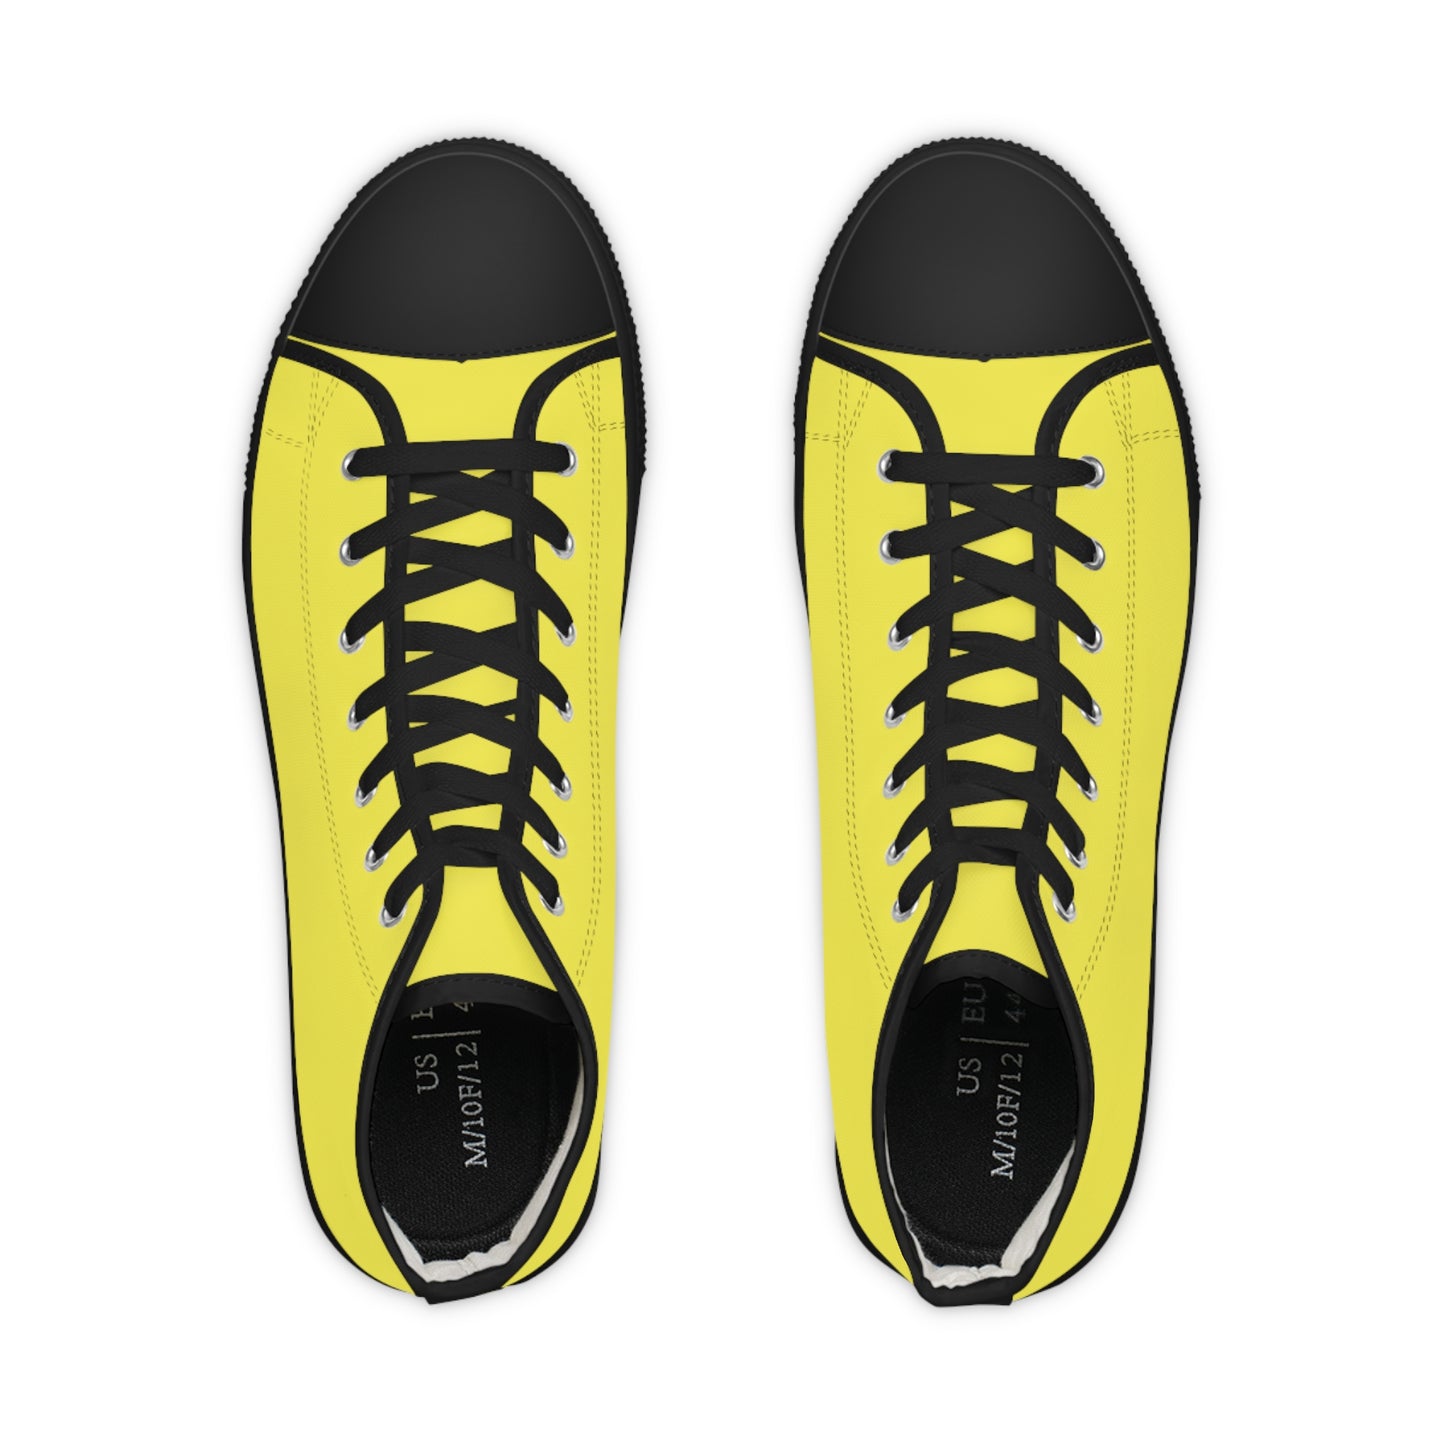 Men's High Top Sneakers - Yellow US 14 White sole